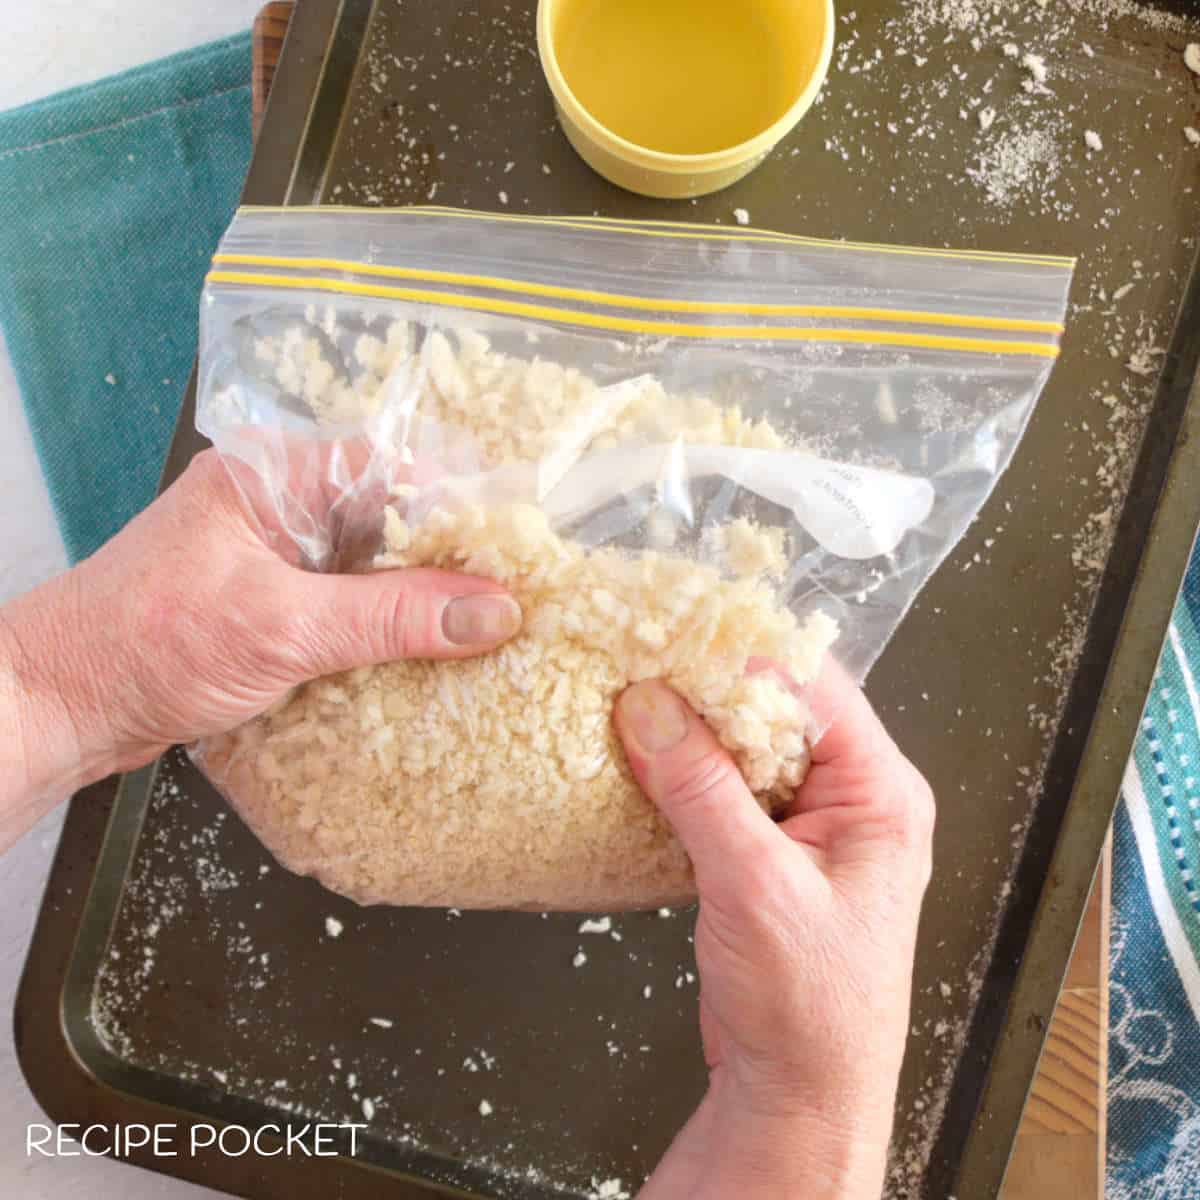 Bread crumbs and a plastic bag being crushed by hand.